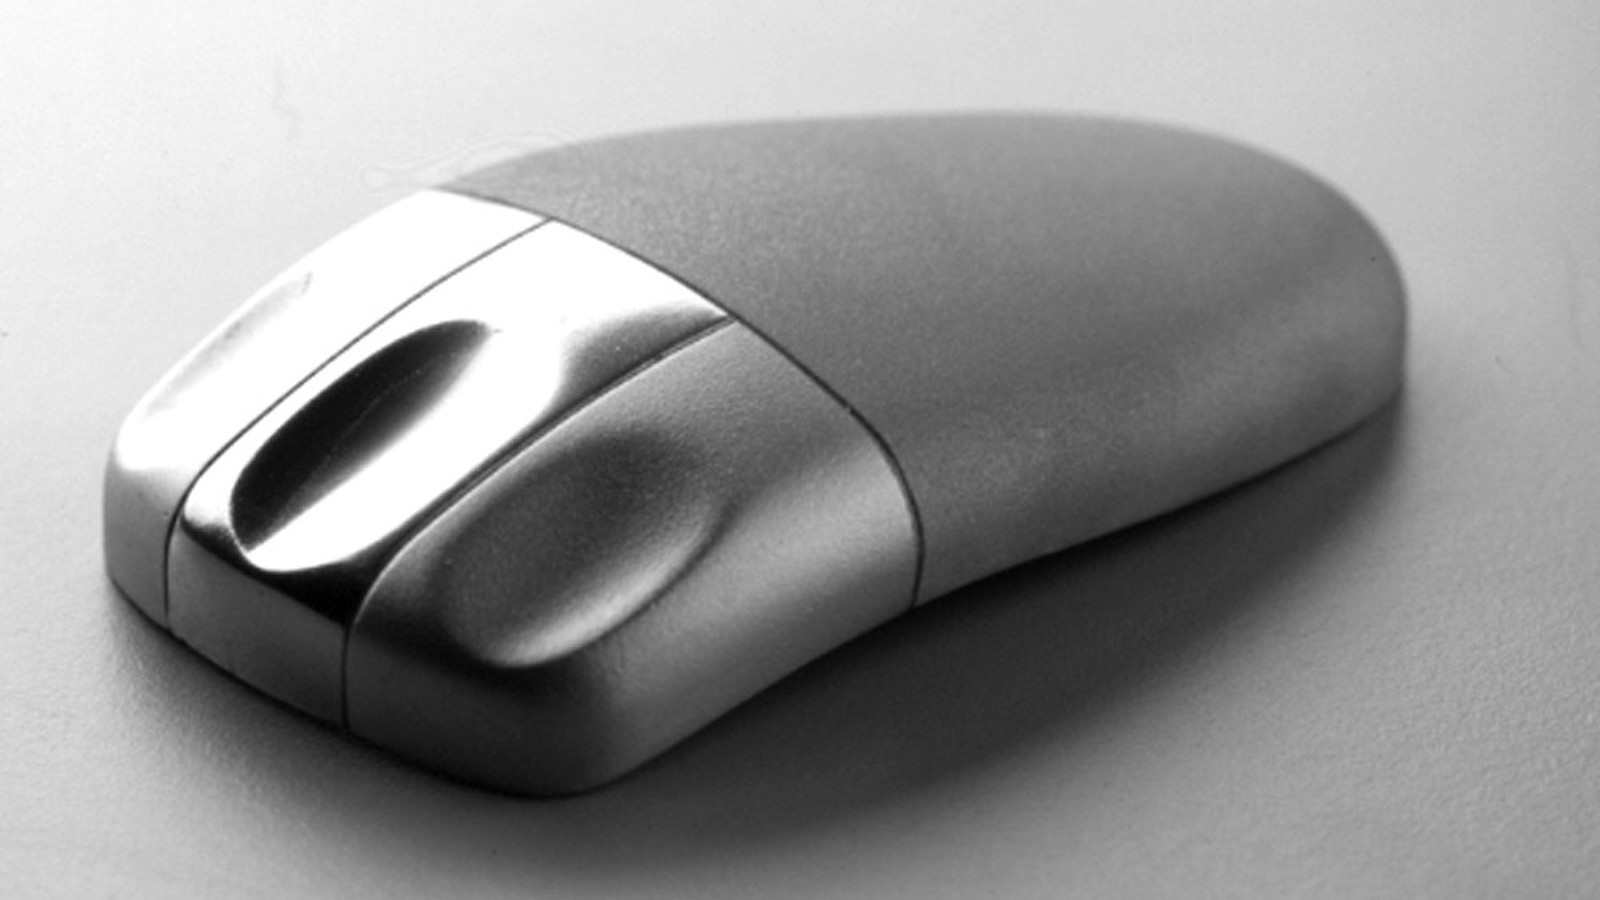 The picture shows a silver mouse with the front part has a glossy finish and the back part has a matte finish